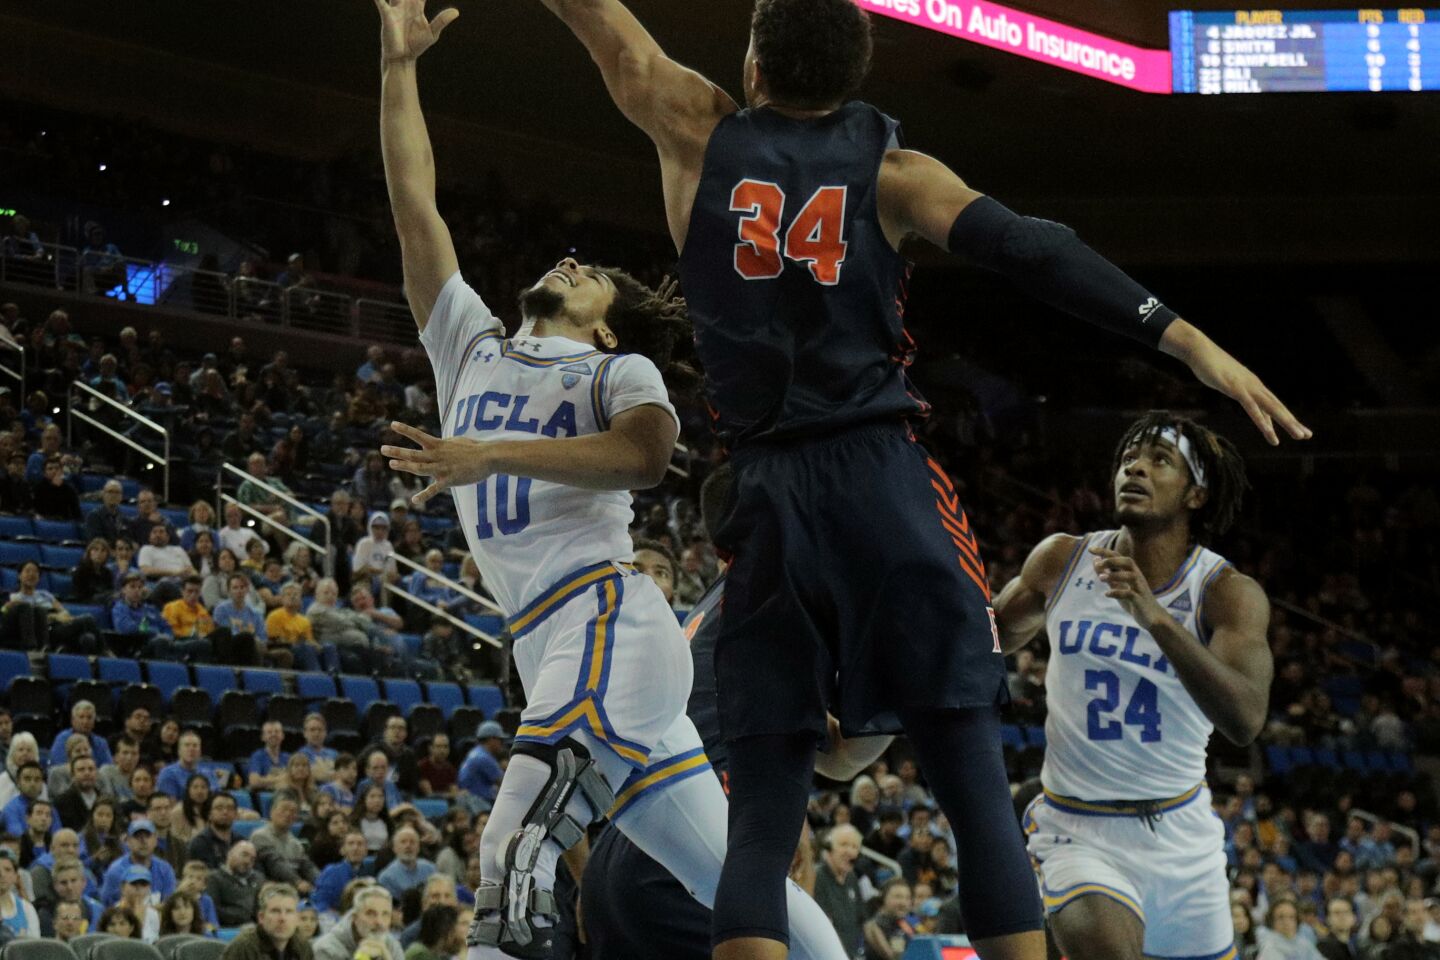 Fullerton forward Jackson Rowe (34) blocks a shot by UCLA guard Tyger Campbell during the second half.